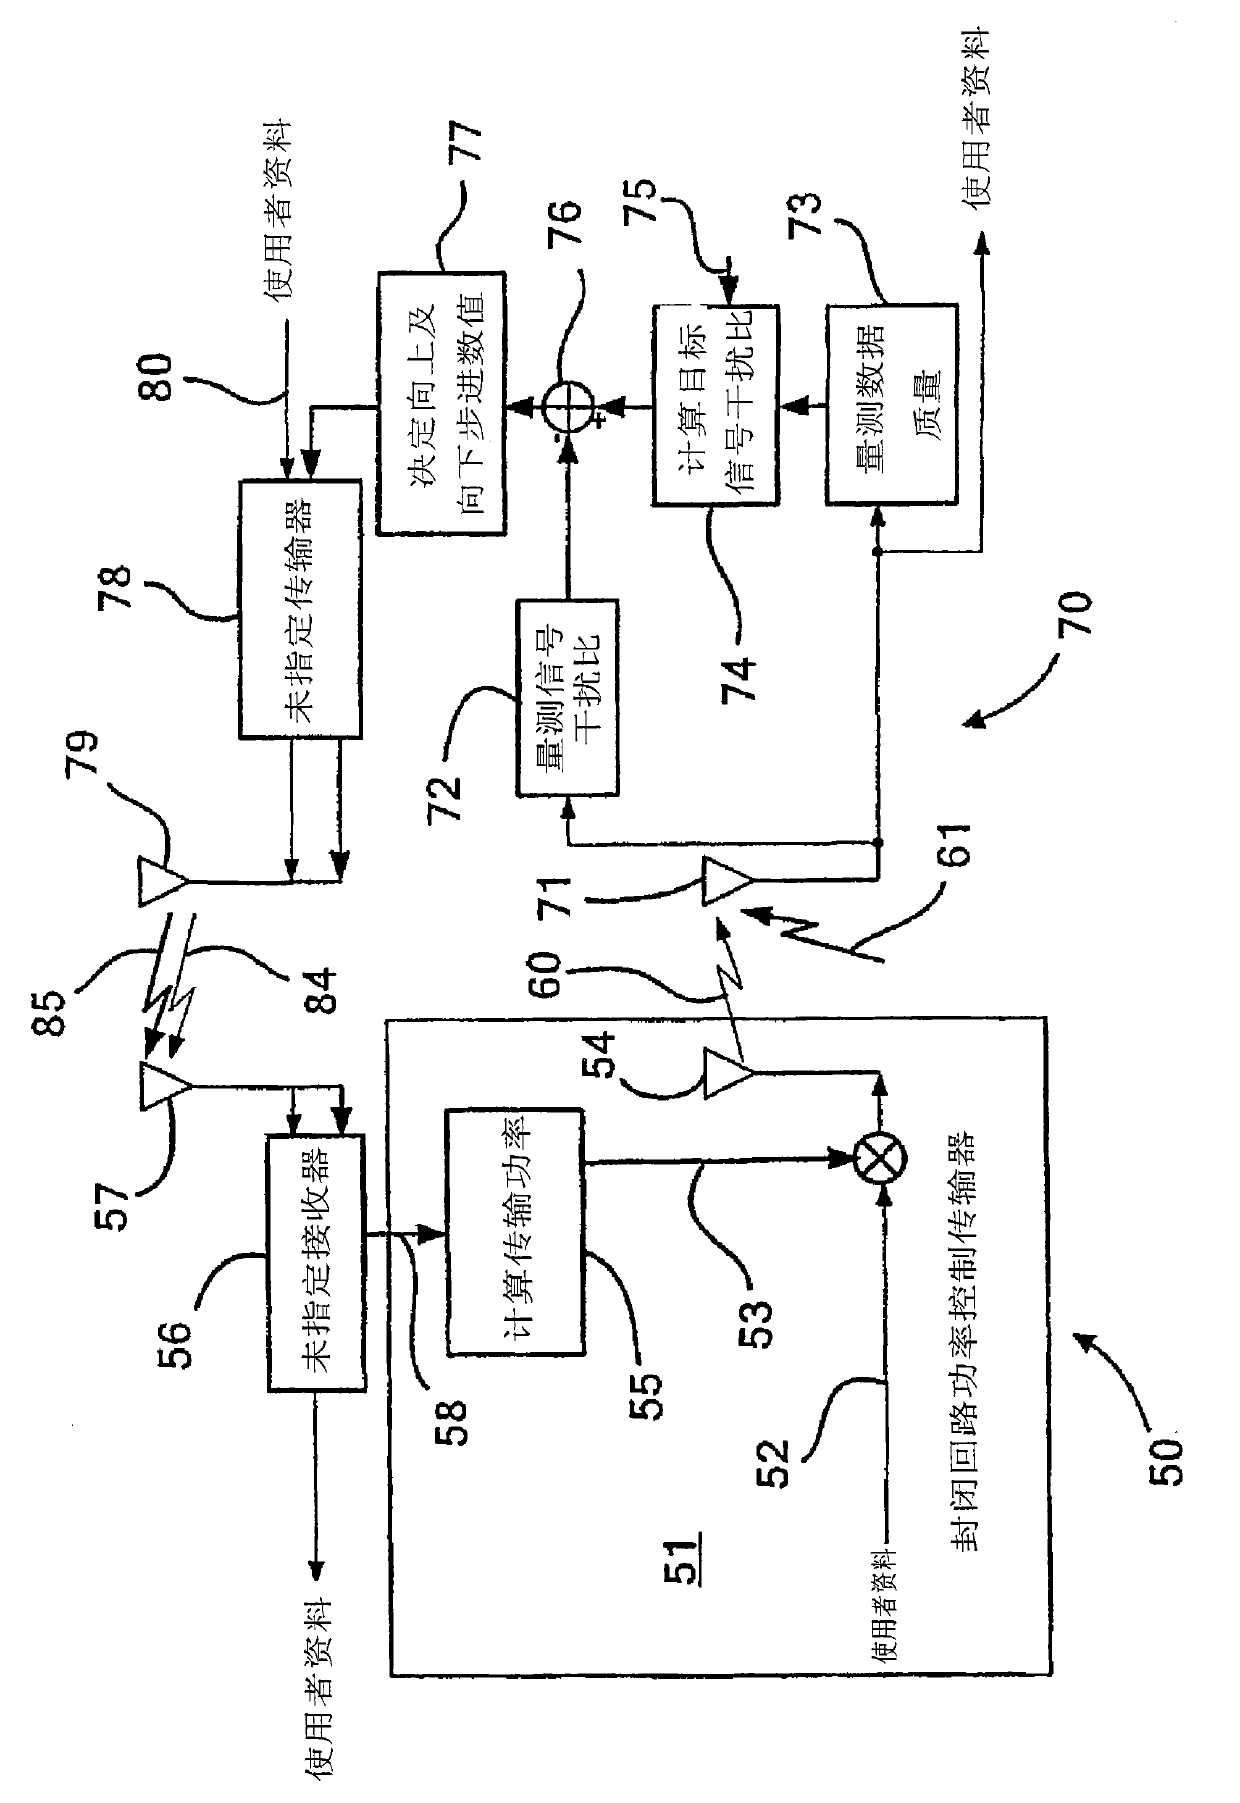 Outer loop power control for wireless communication systems